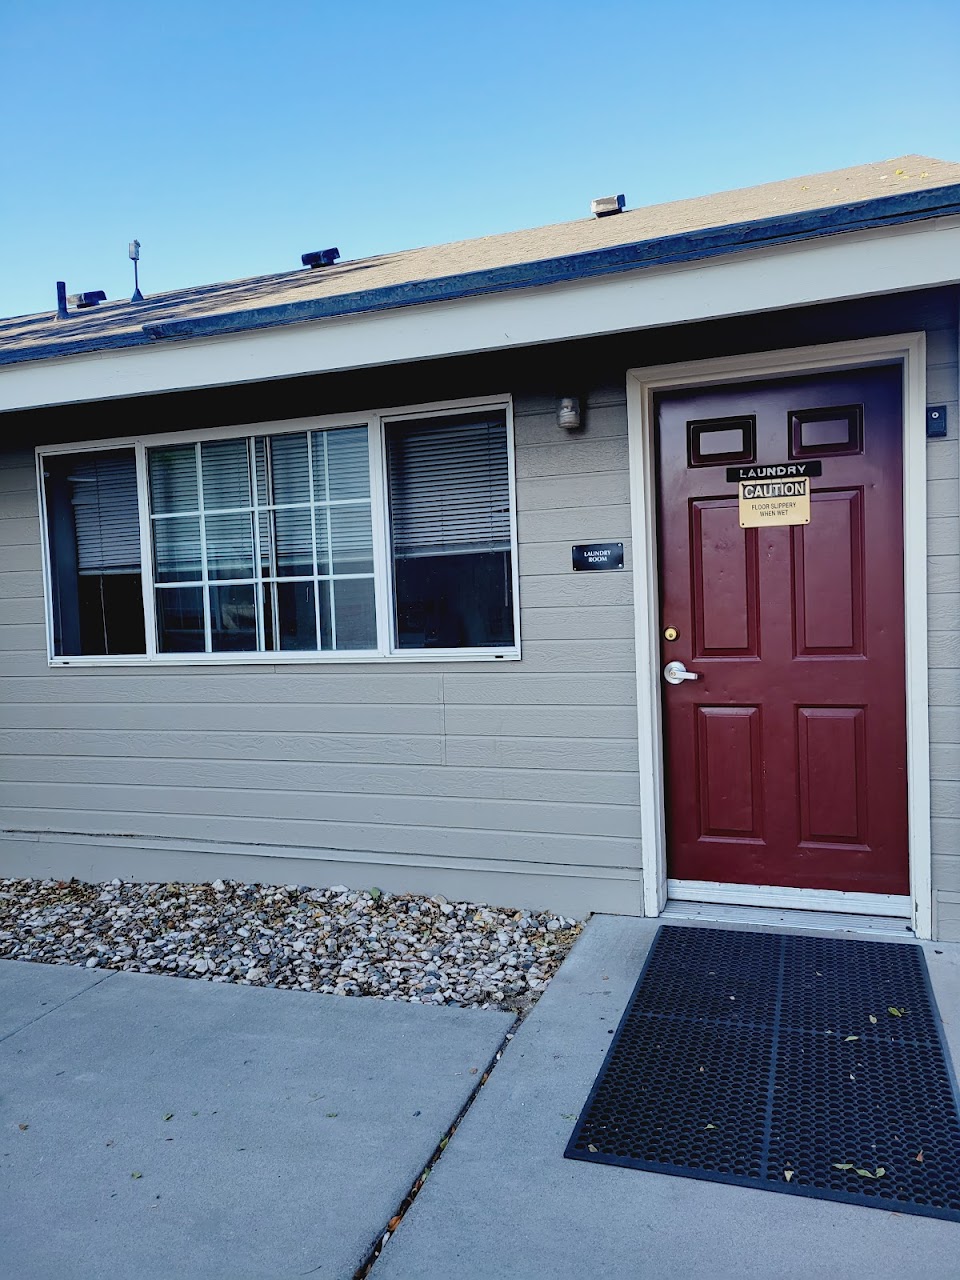 Photo of ARBORWOOD II APARTMENTS. Affordable housing located at 451 NORTH BROADWAY FALLON, NV 89406